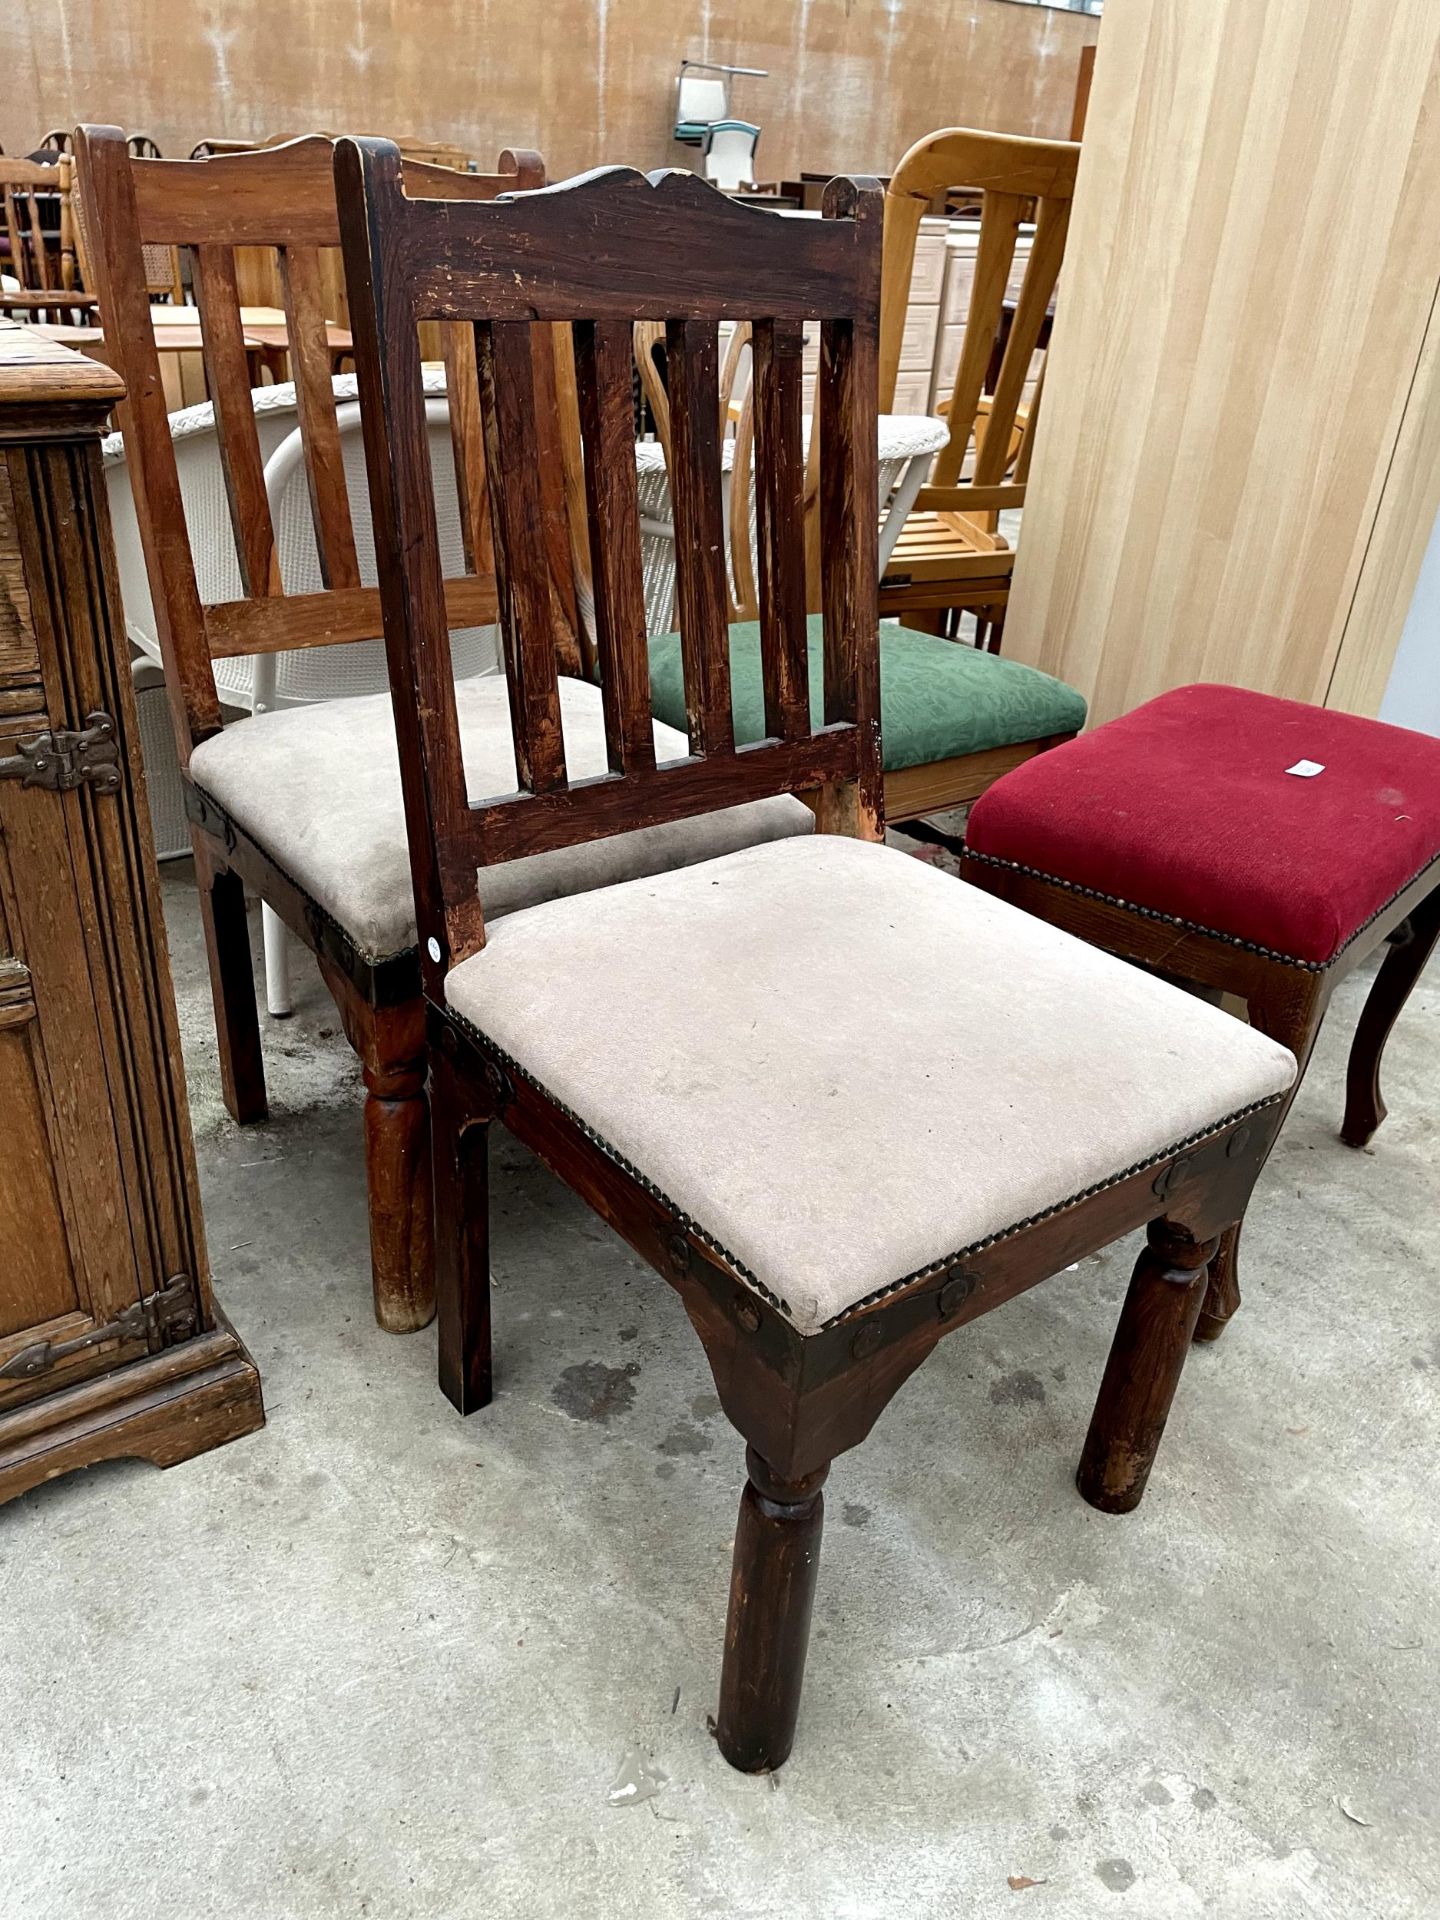 THREE VARIOUS DINING CHAIRS AND A STOOL - Image 2 of 3